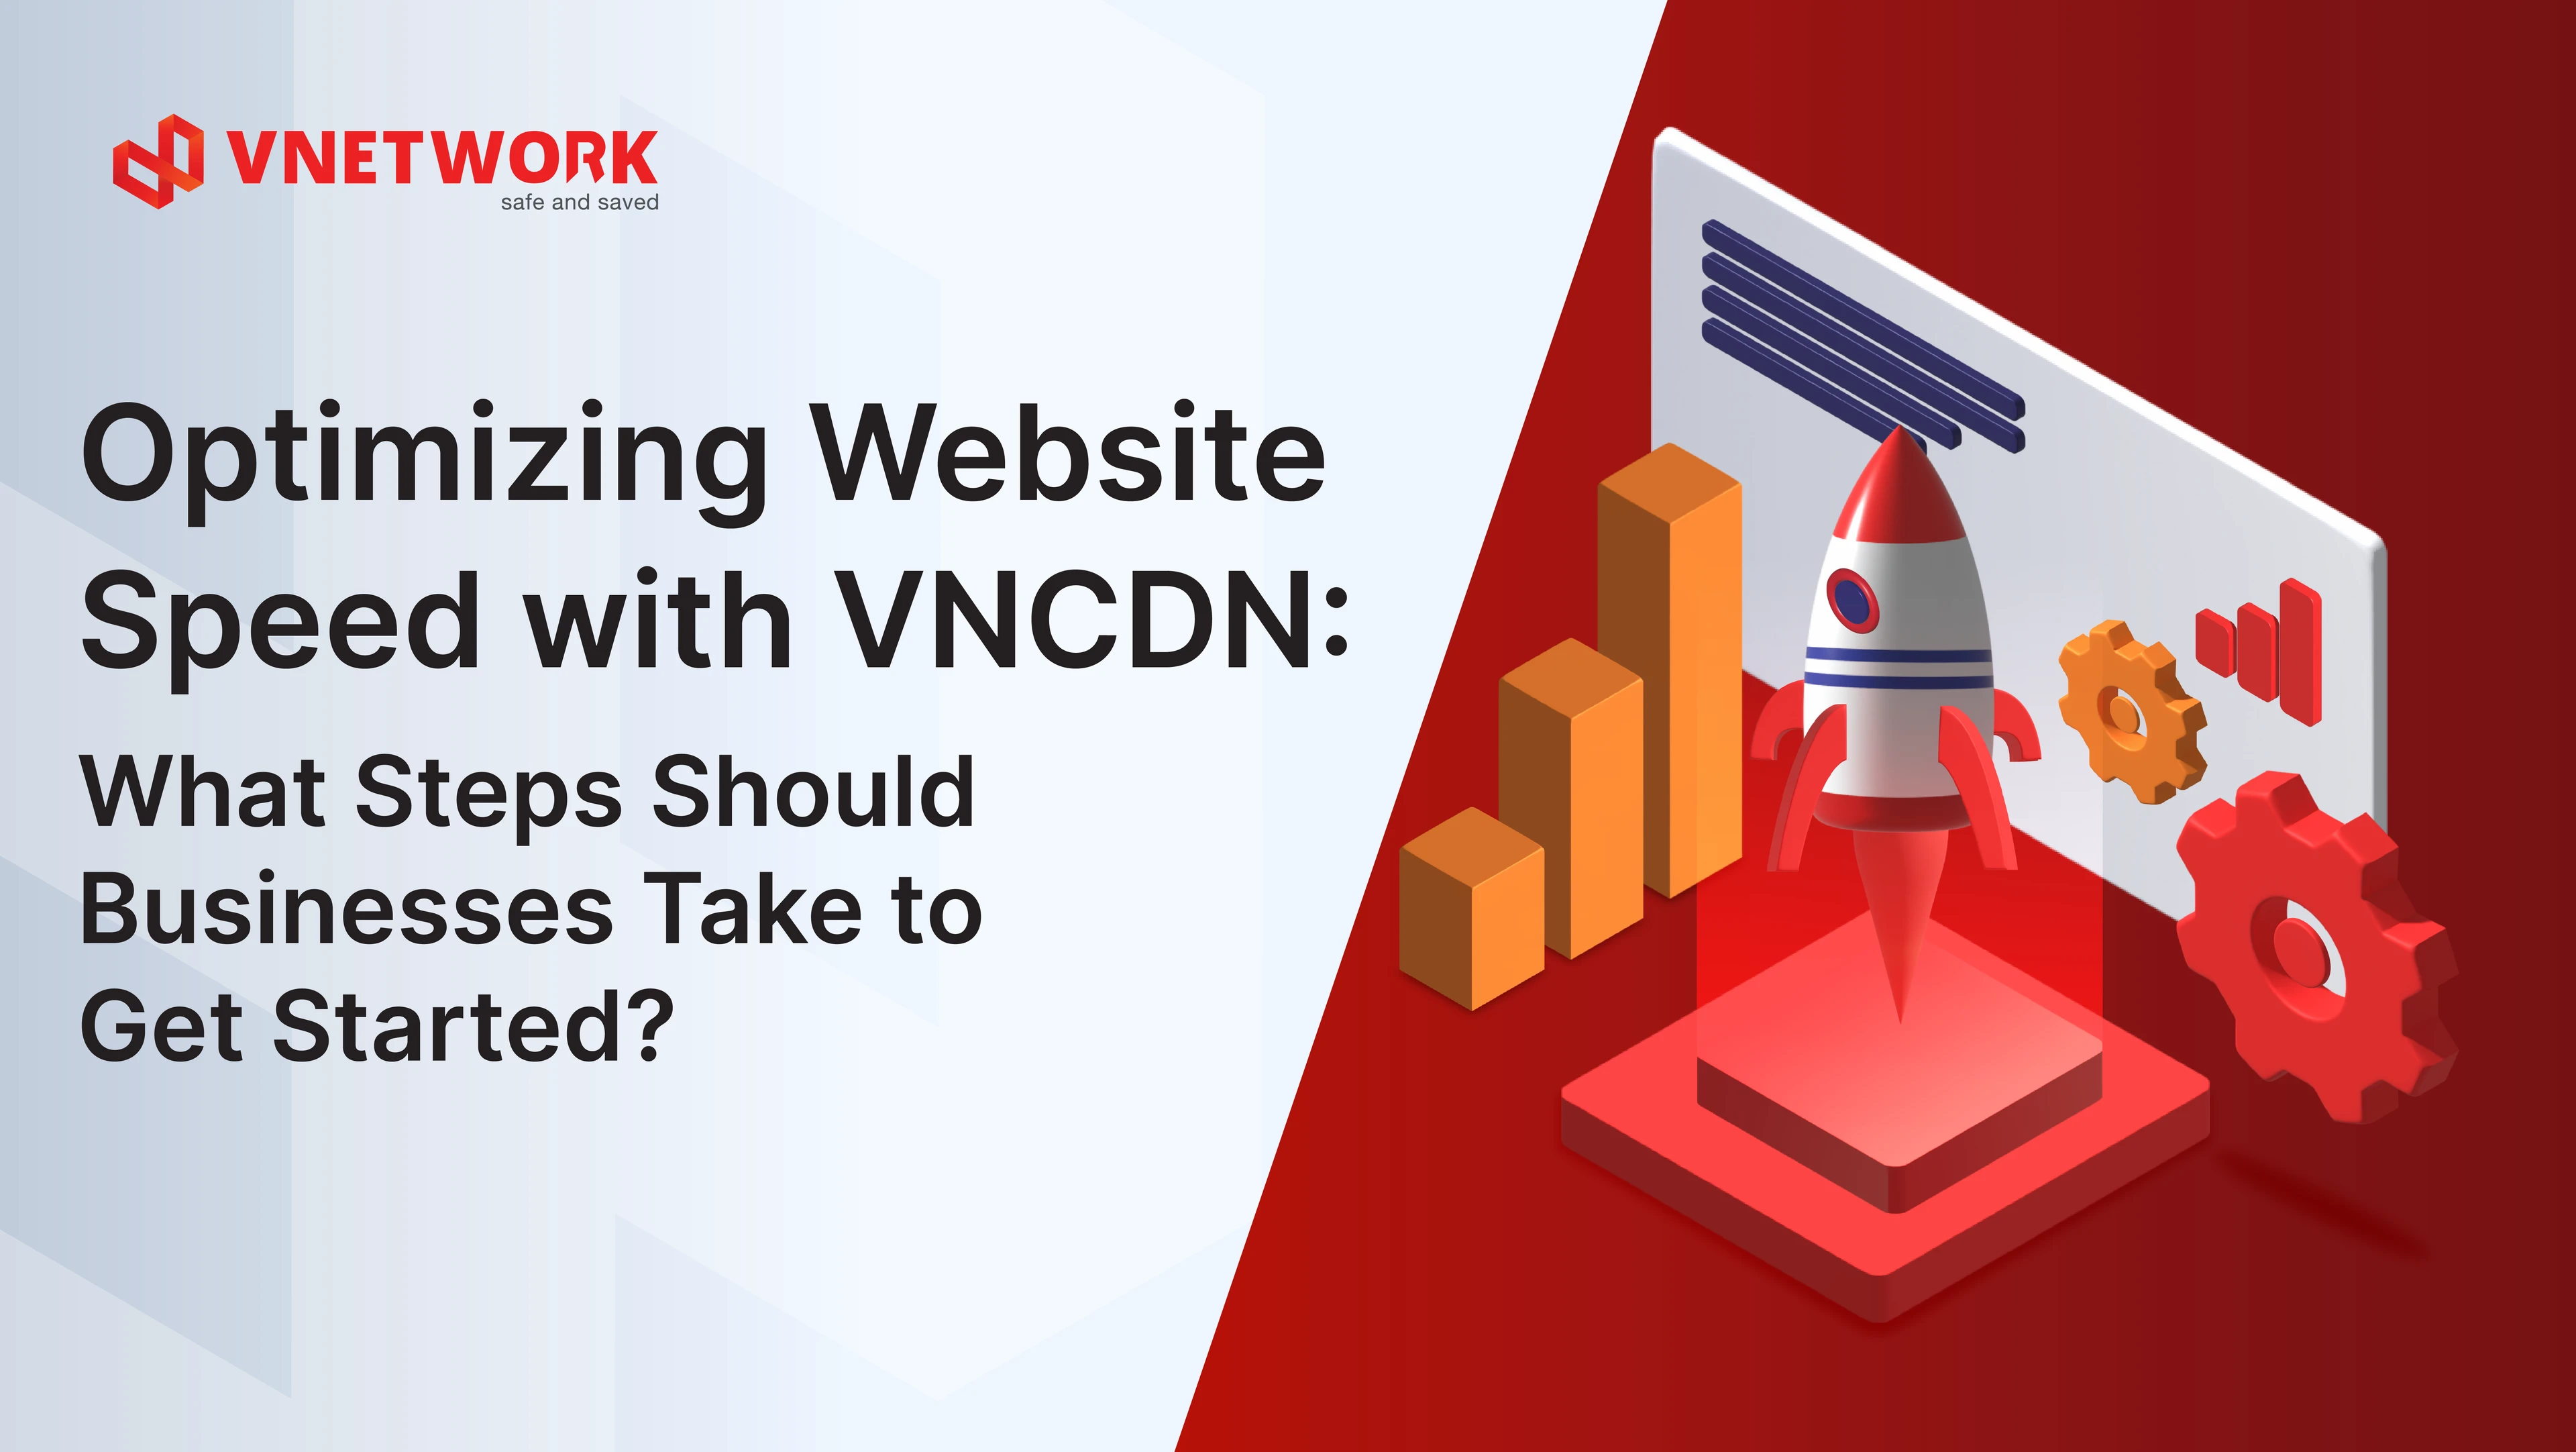 Optimizing Website with VNCDN: What Steps Should Businesses Take to Get Started?